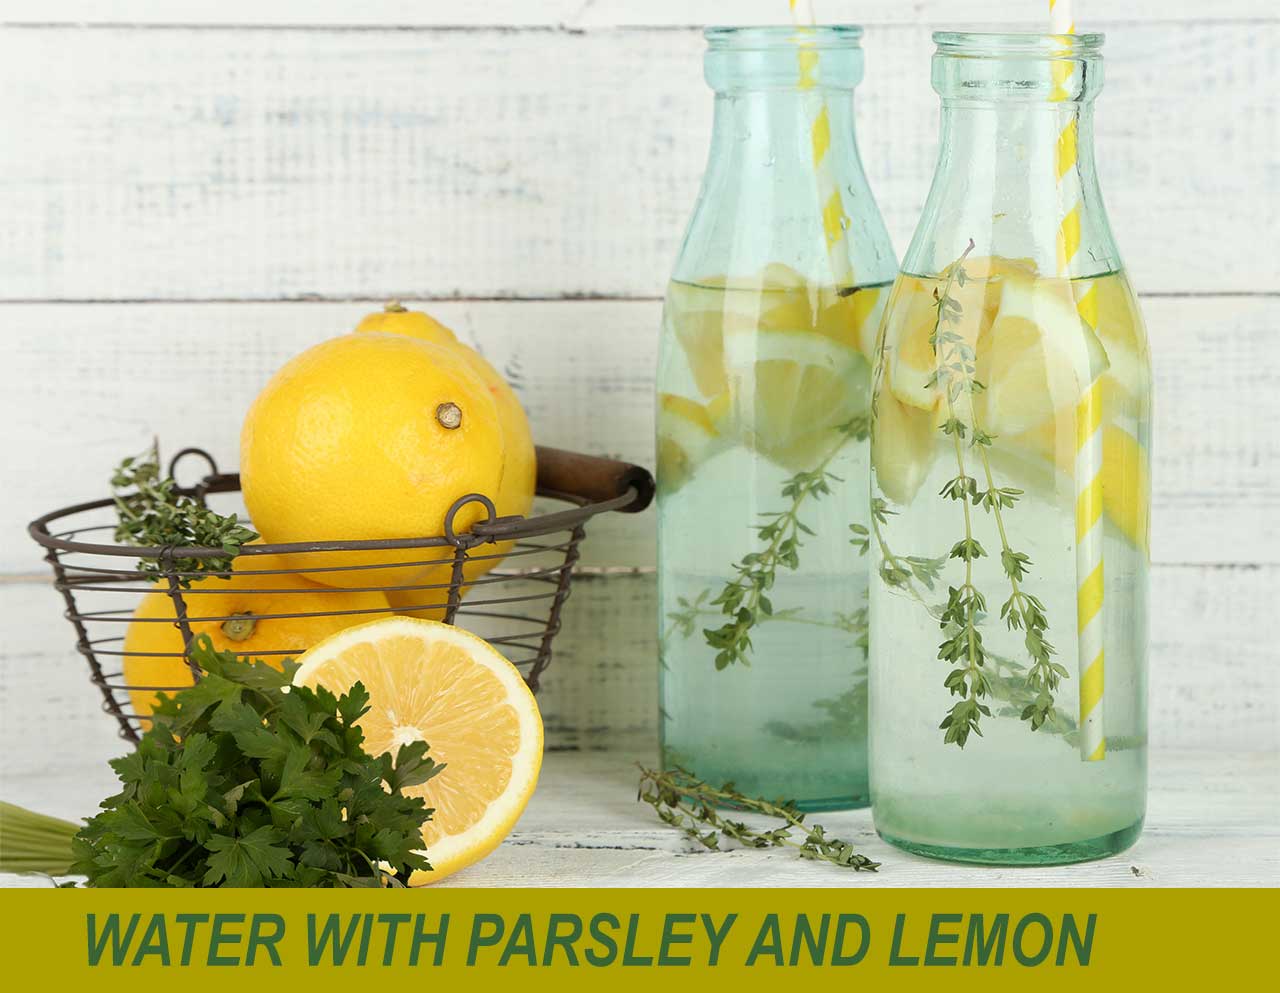 Water with parsley and lemon 